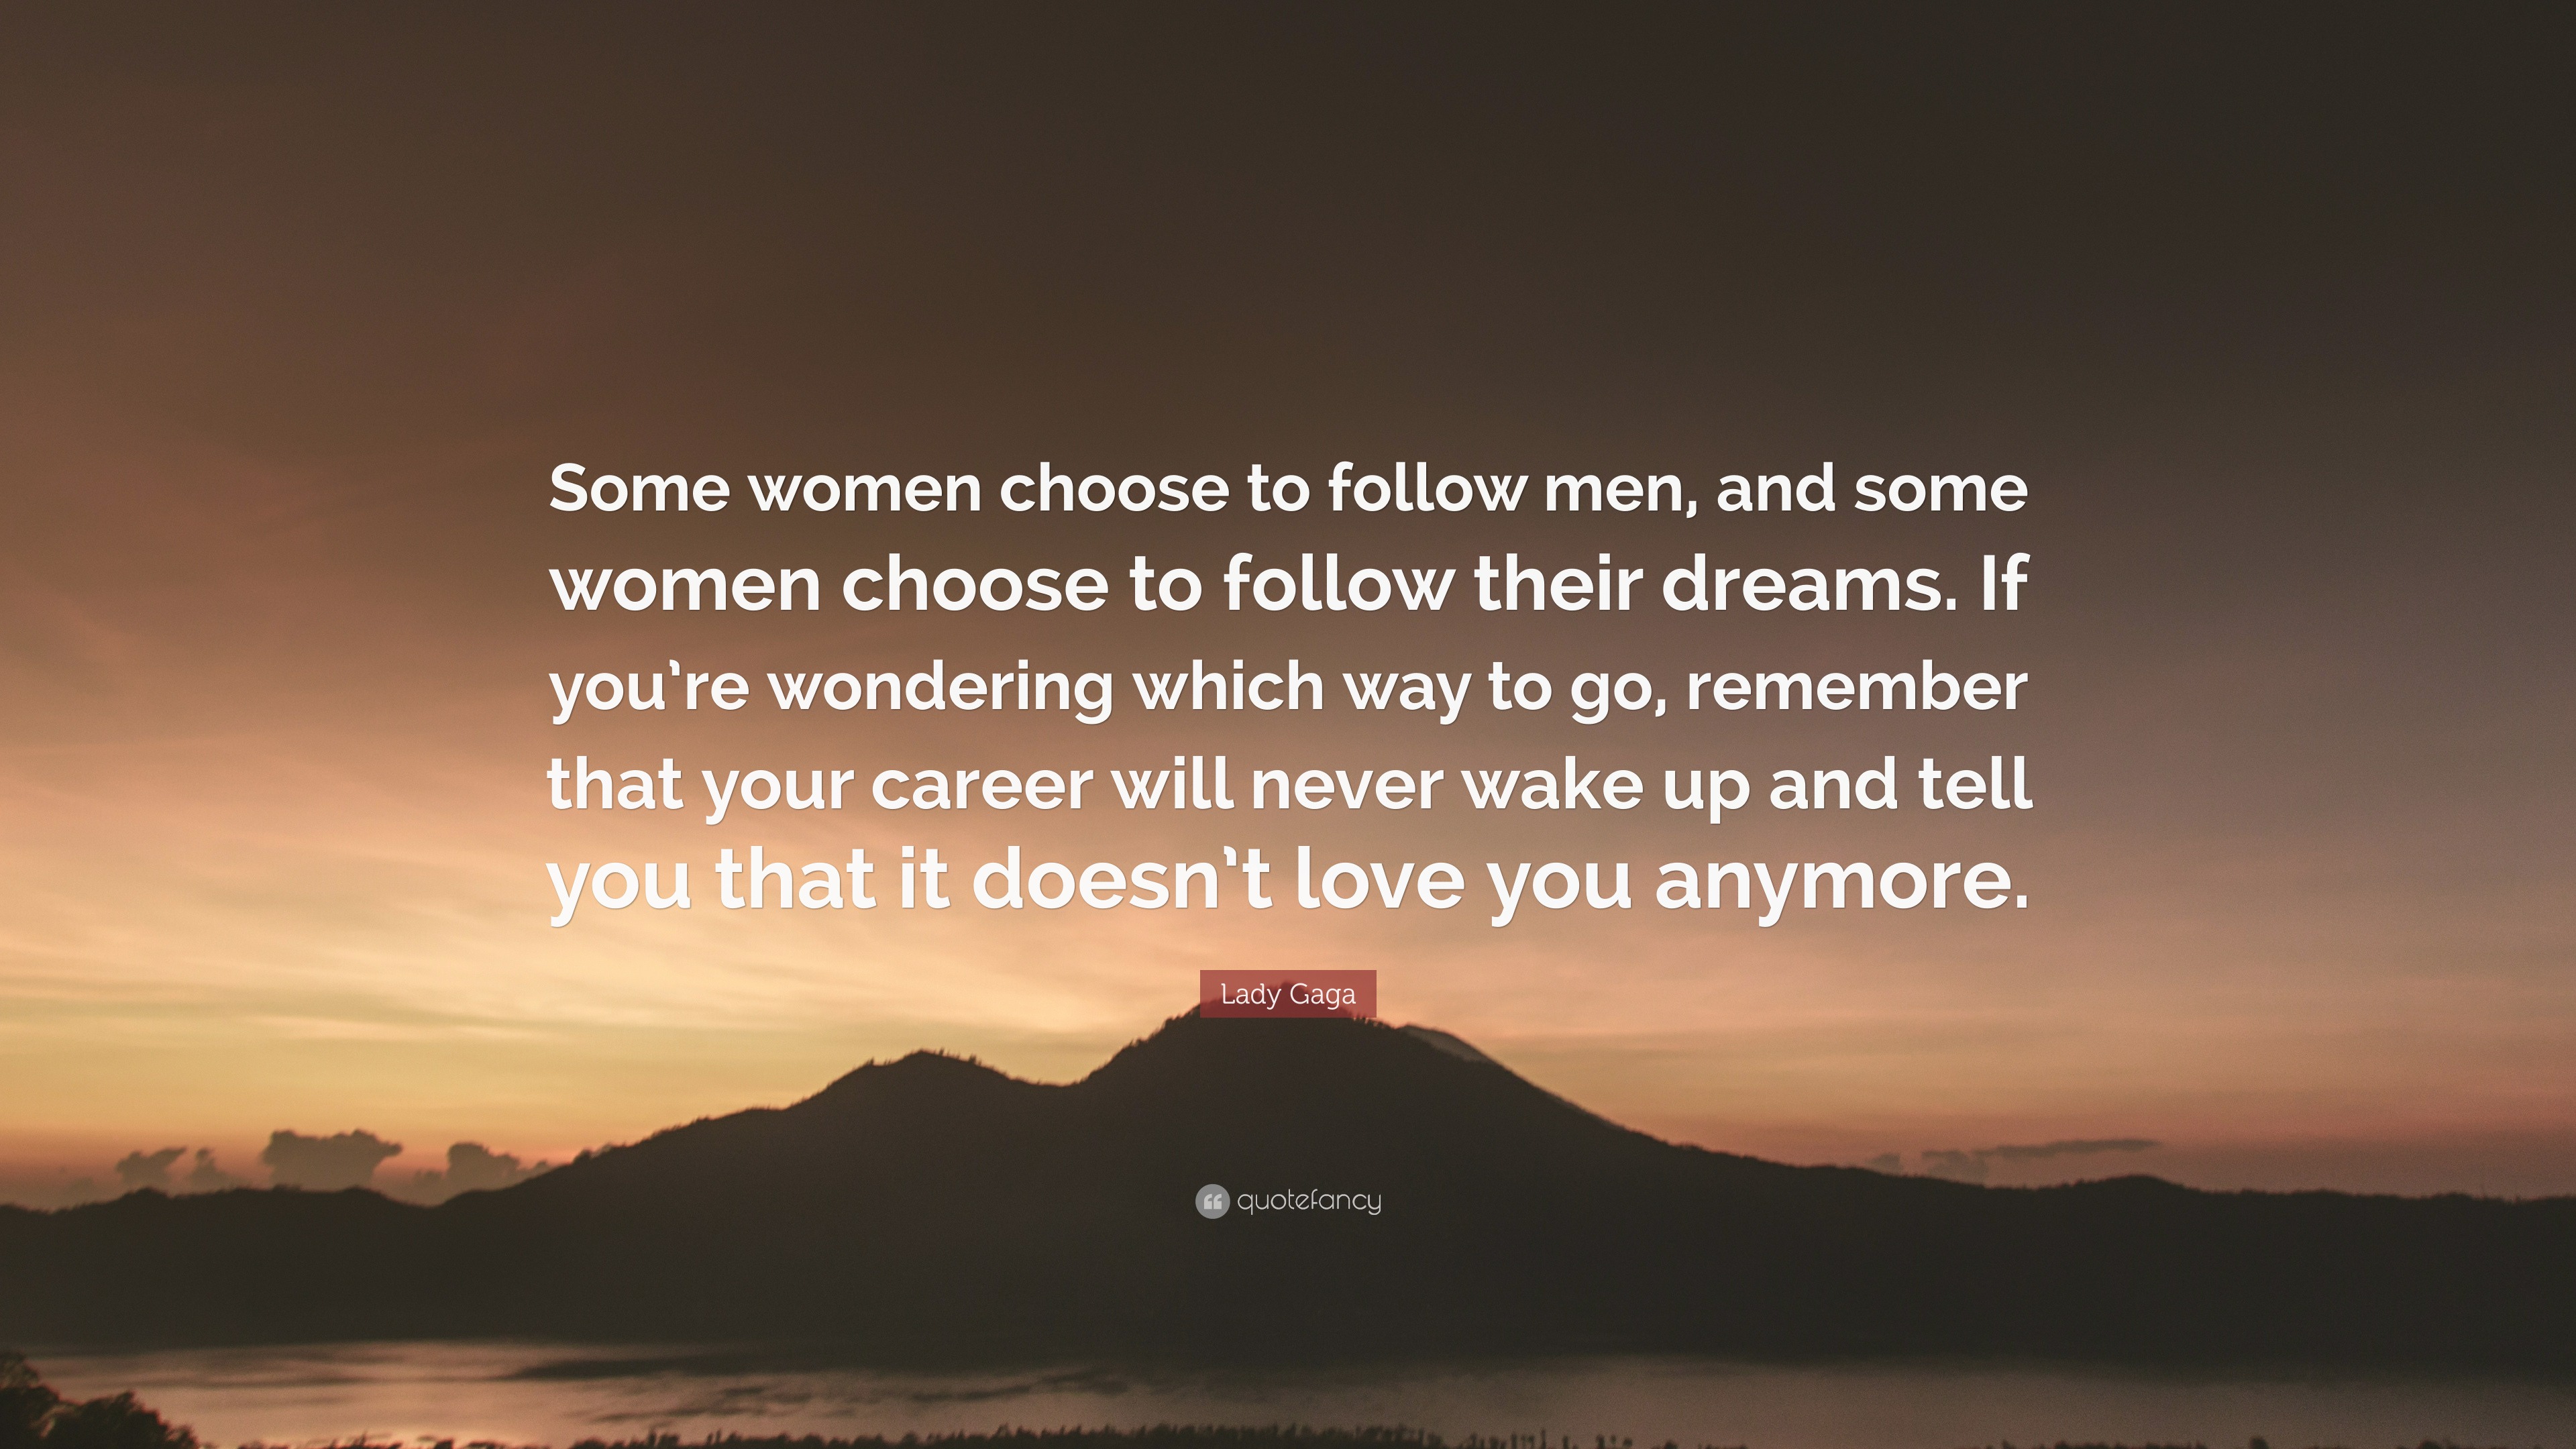 Lady Gaga Quote: “Some women choose to follow men, and some women ...